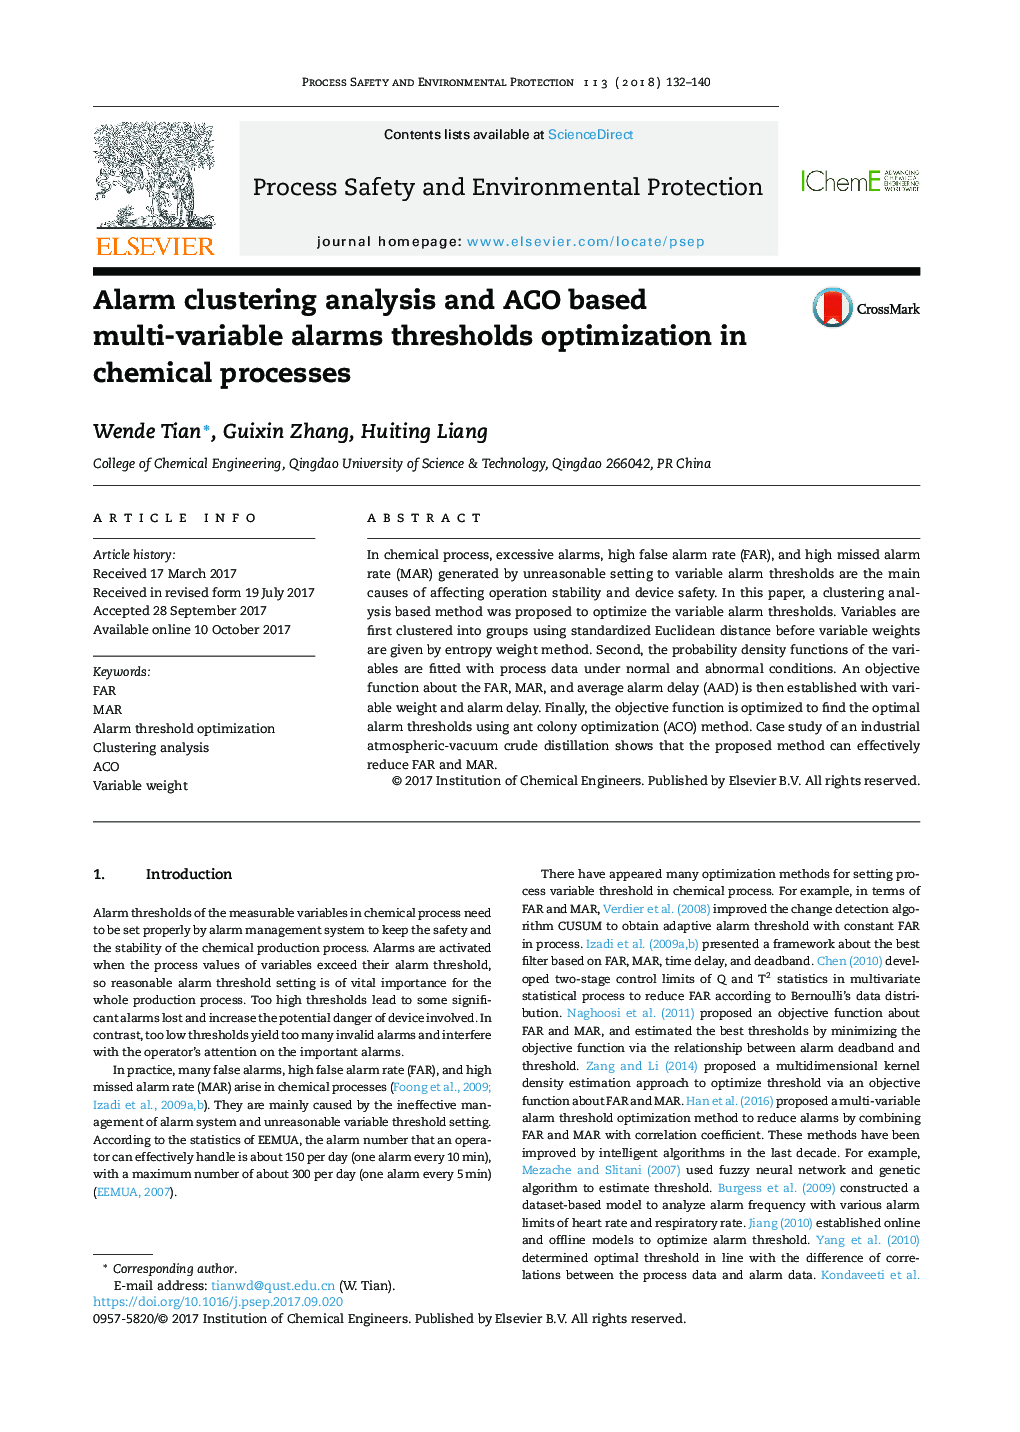 Alarm clustering analysis and ACO based multi-variable alarms thresholds optimization in chemical processes